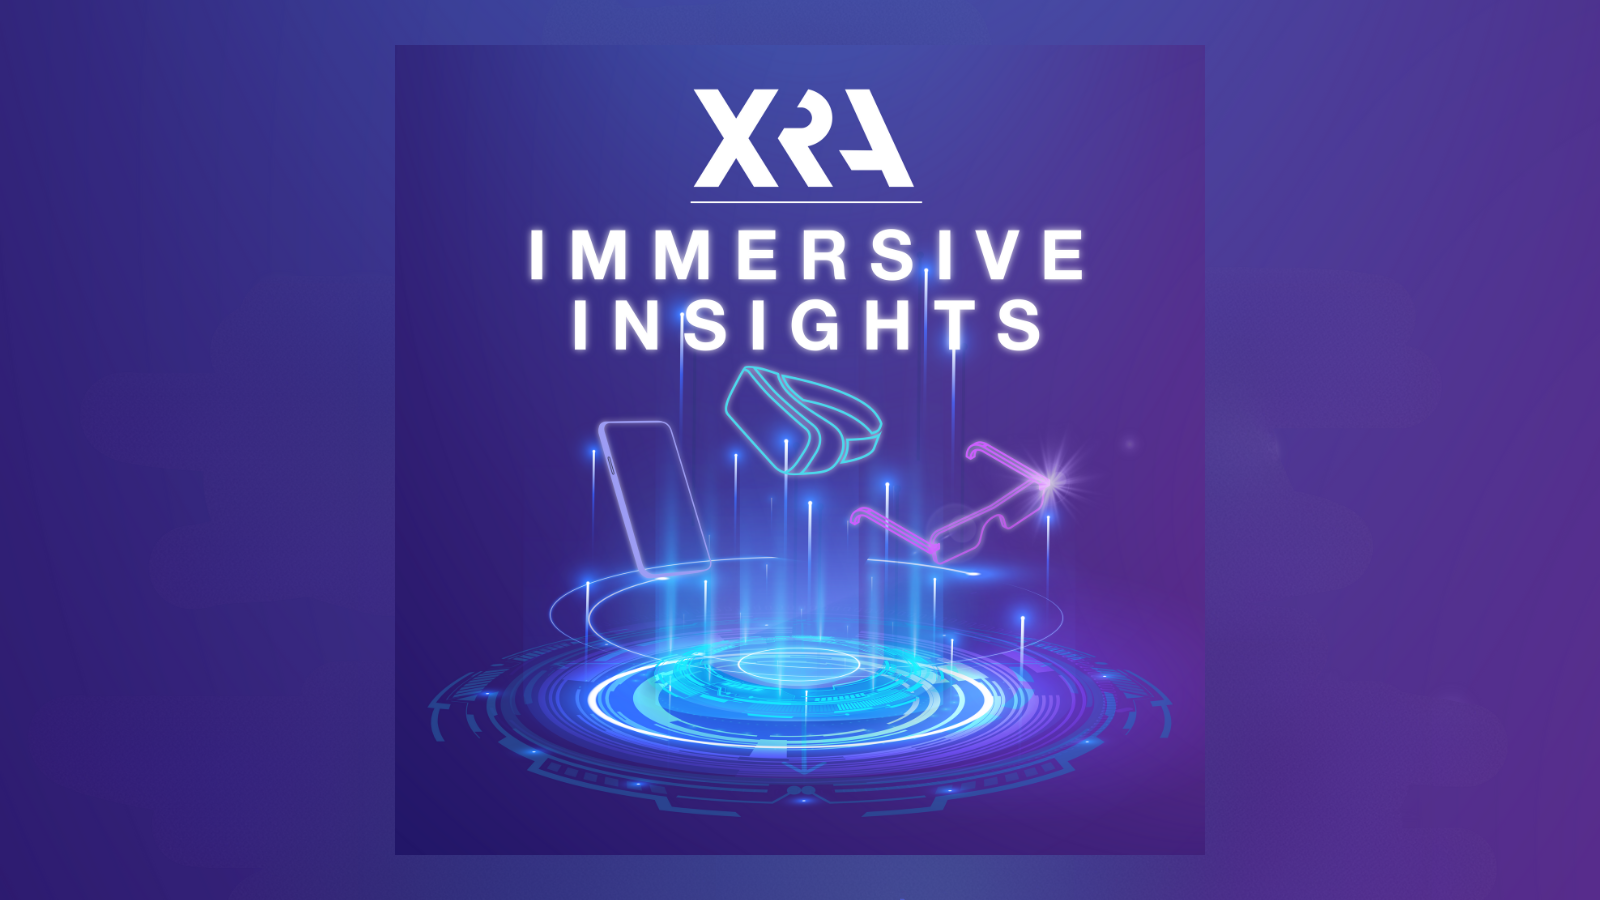 SUBSCRIBE TO XRA’S PODCAST SERIES “IMMERSIVE INSIGHTS”